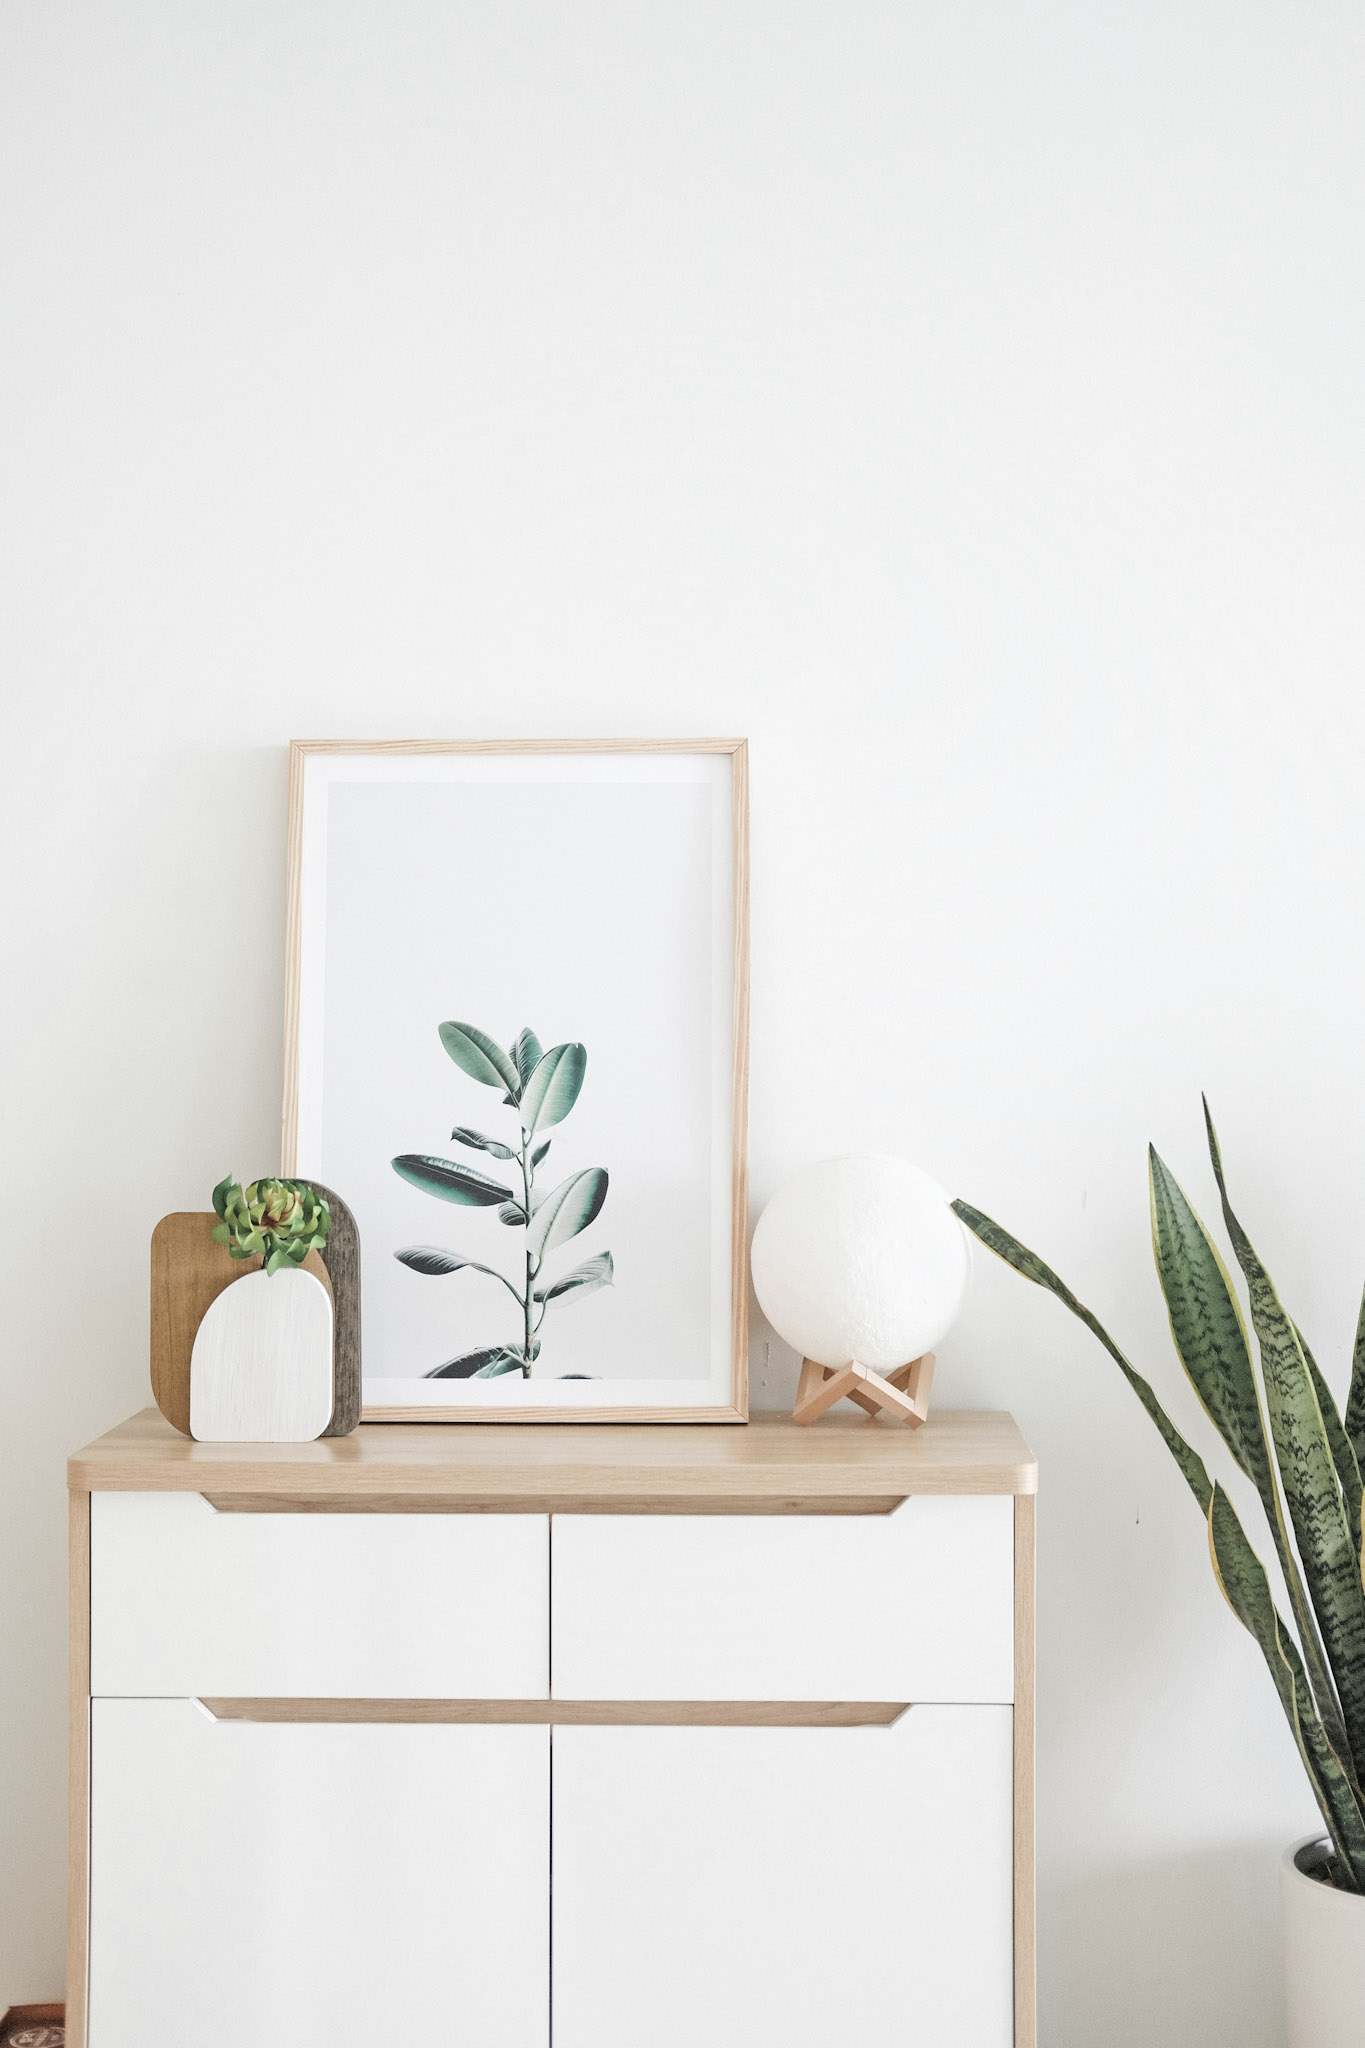 A white and natural wood night stand with wall art leaning. This article covers using wall art to infuse color and personality.